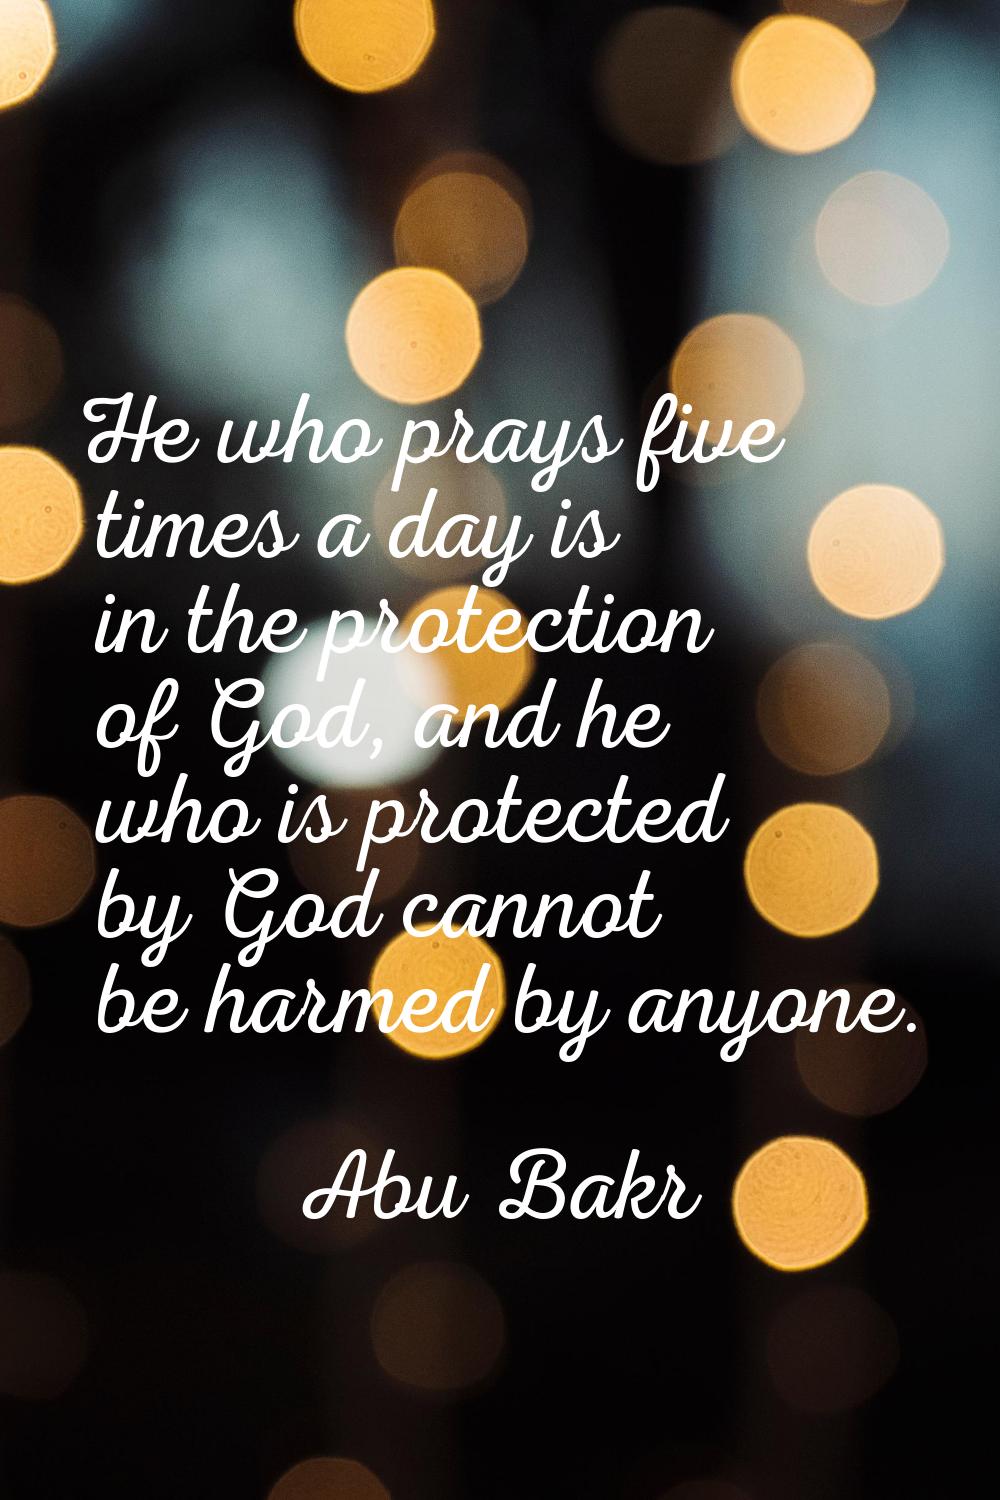 He who prays five times a day is in the protection of God, and he who is protected by God cannot be